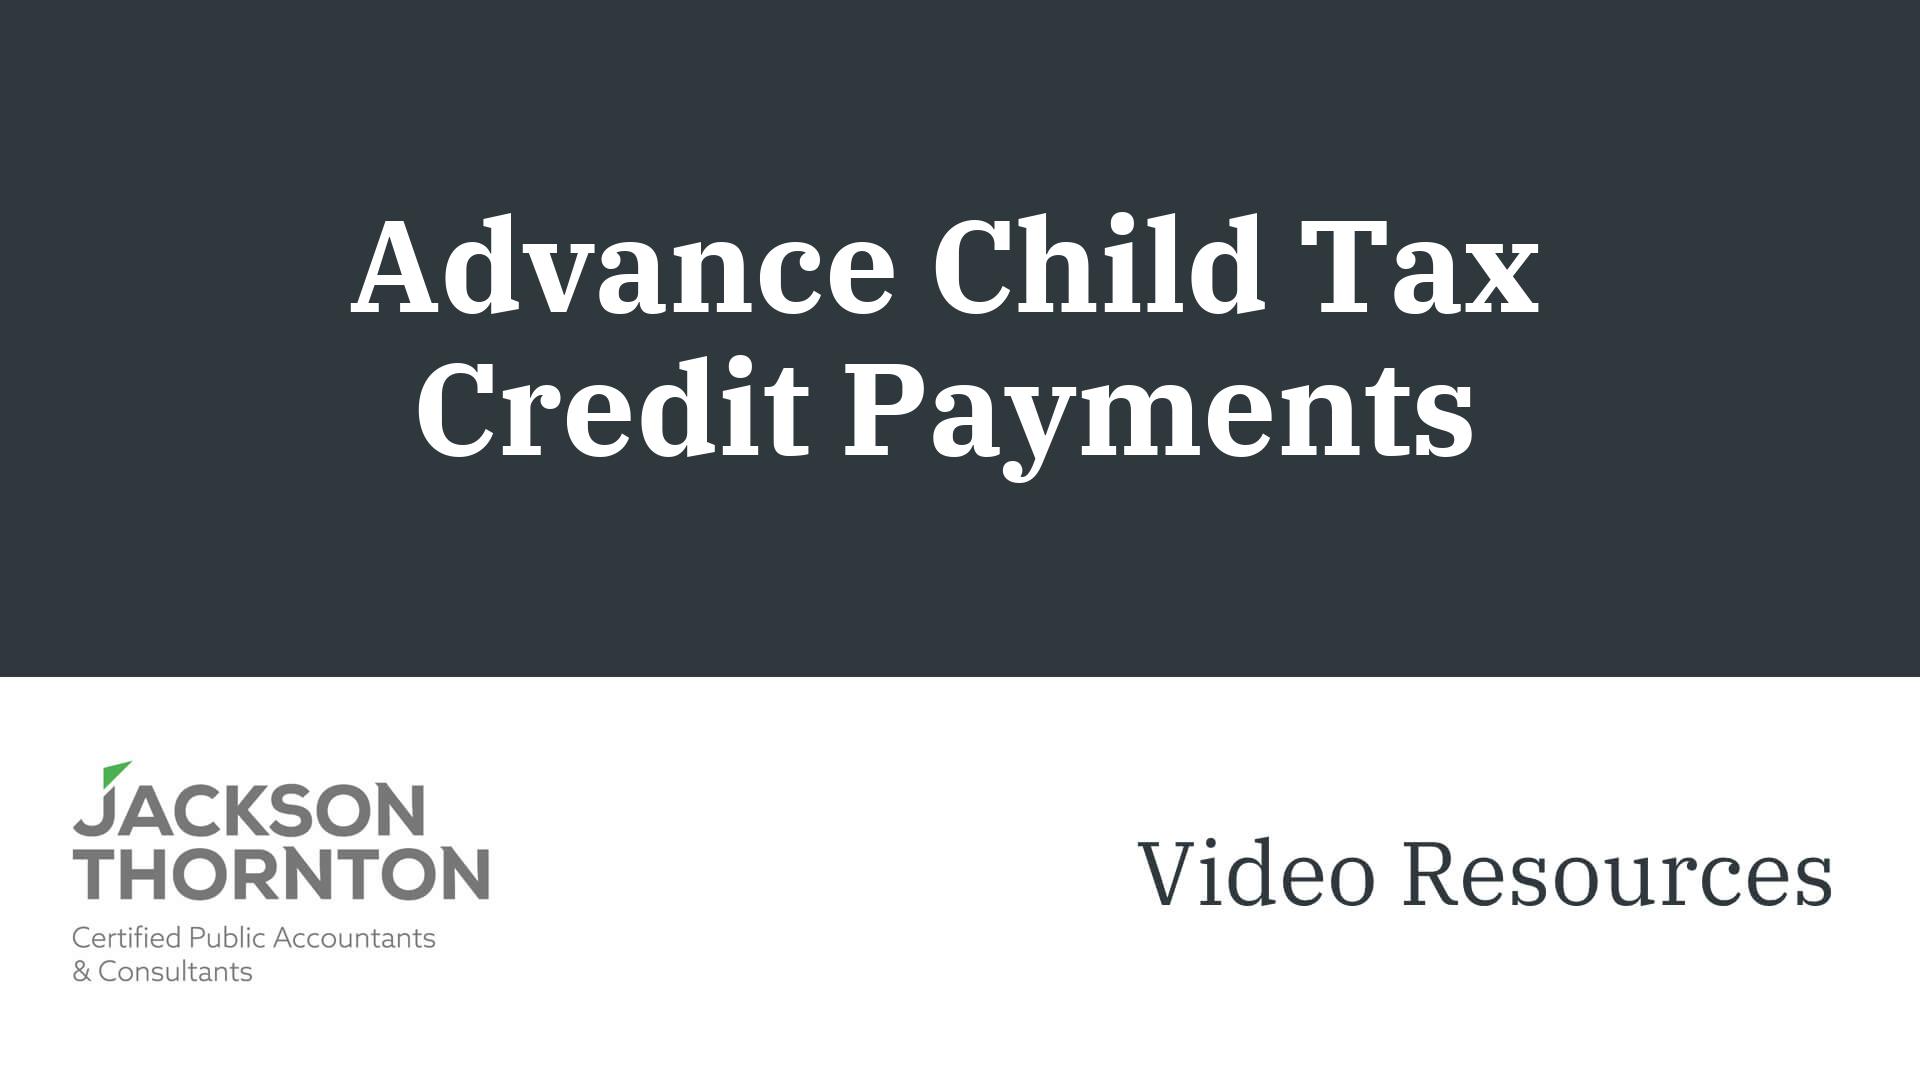 Advance Child Tax Credit Payments